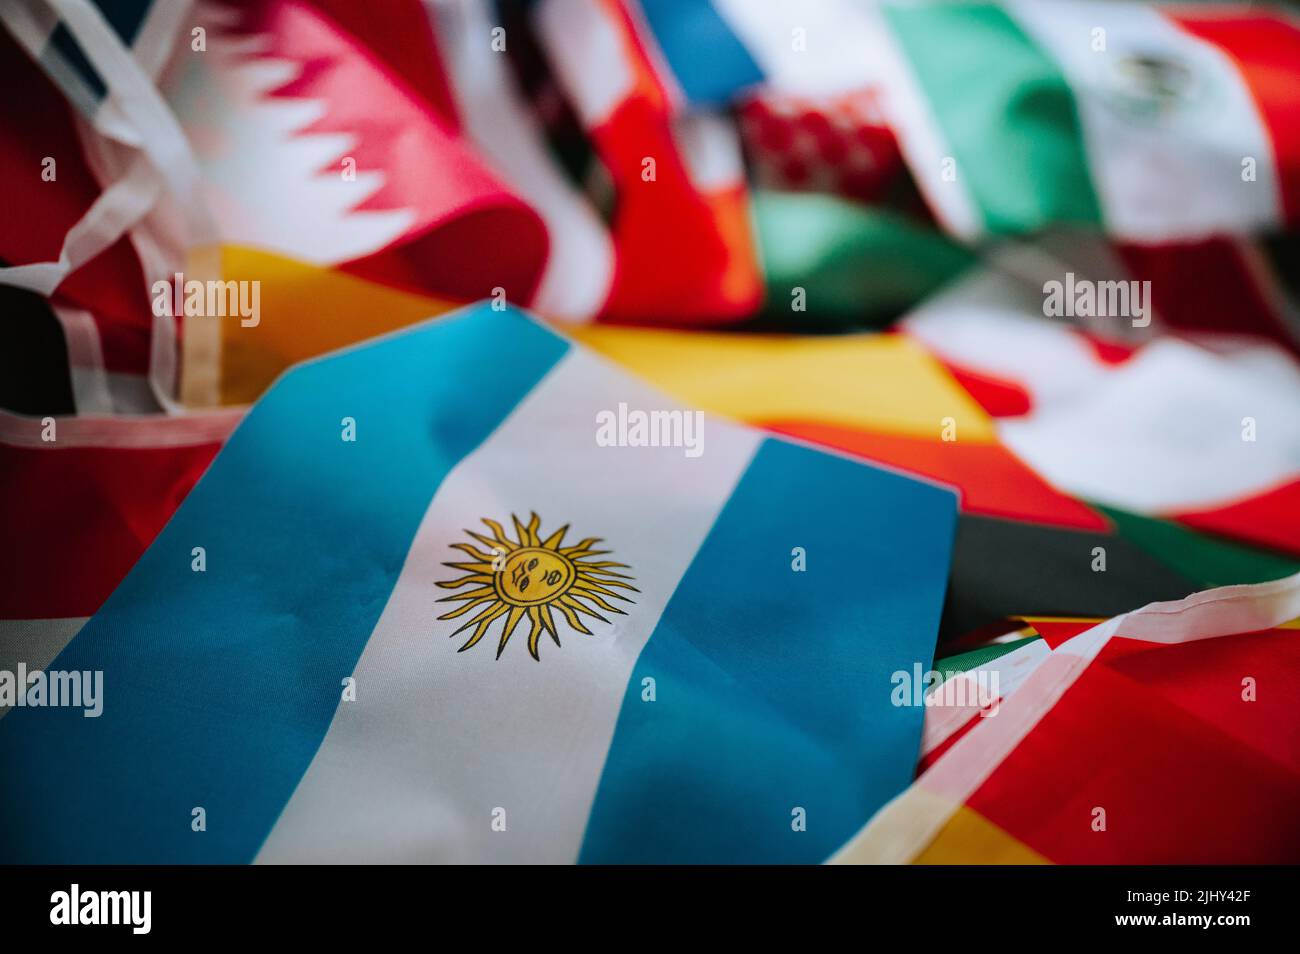 Detail on Argentina National flag for support on football tournament Stock Photo